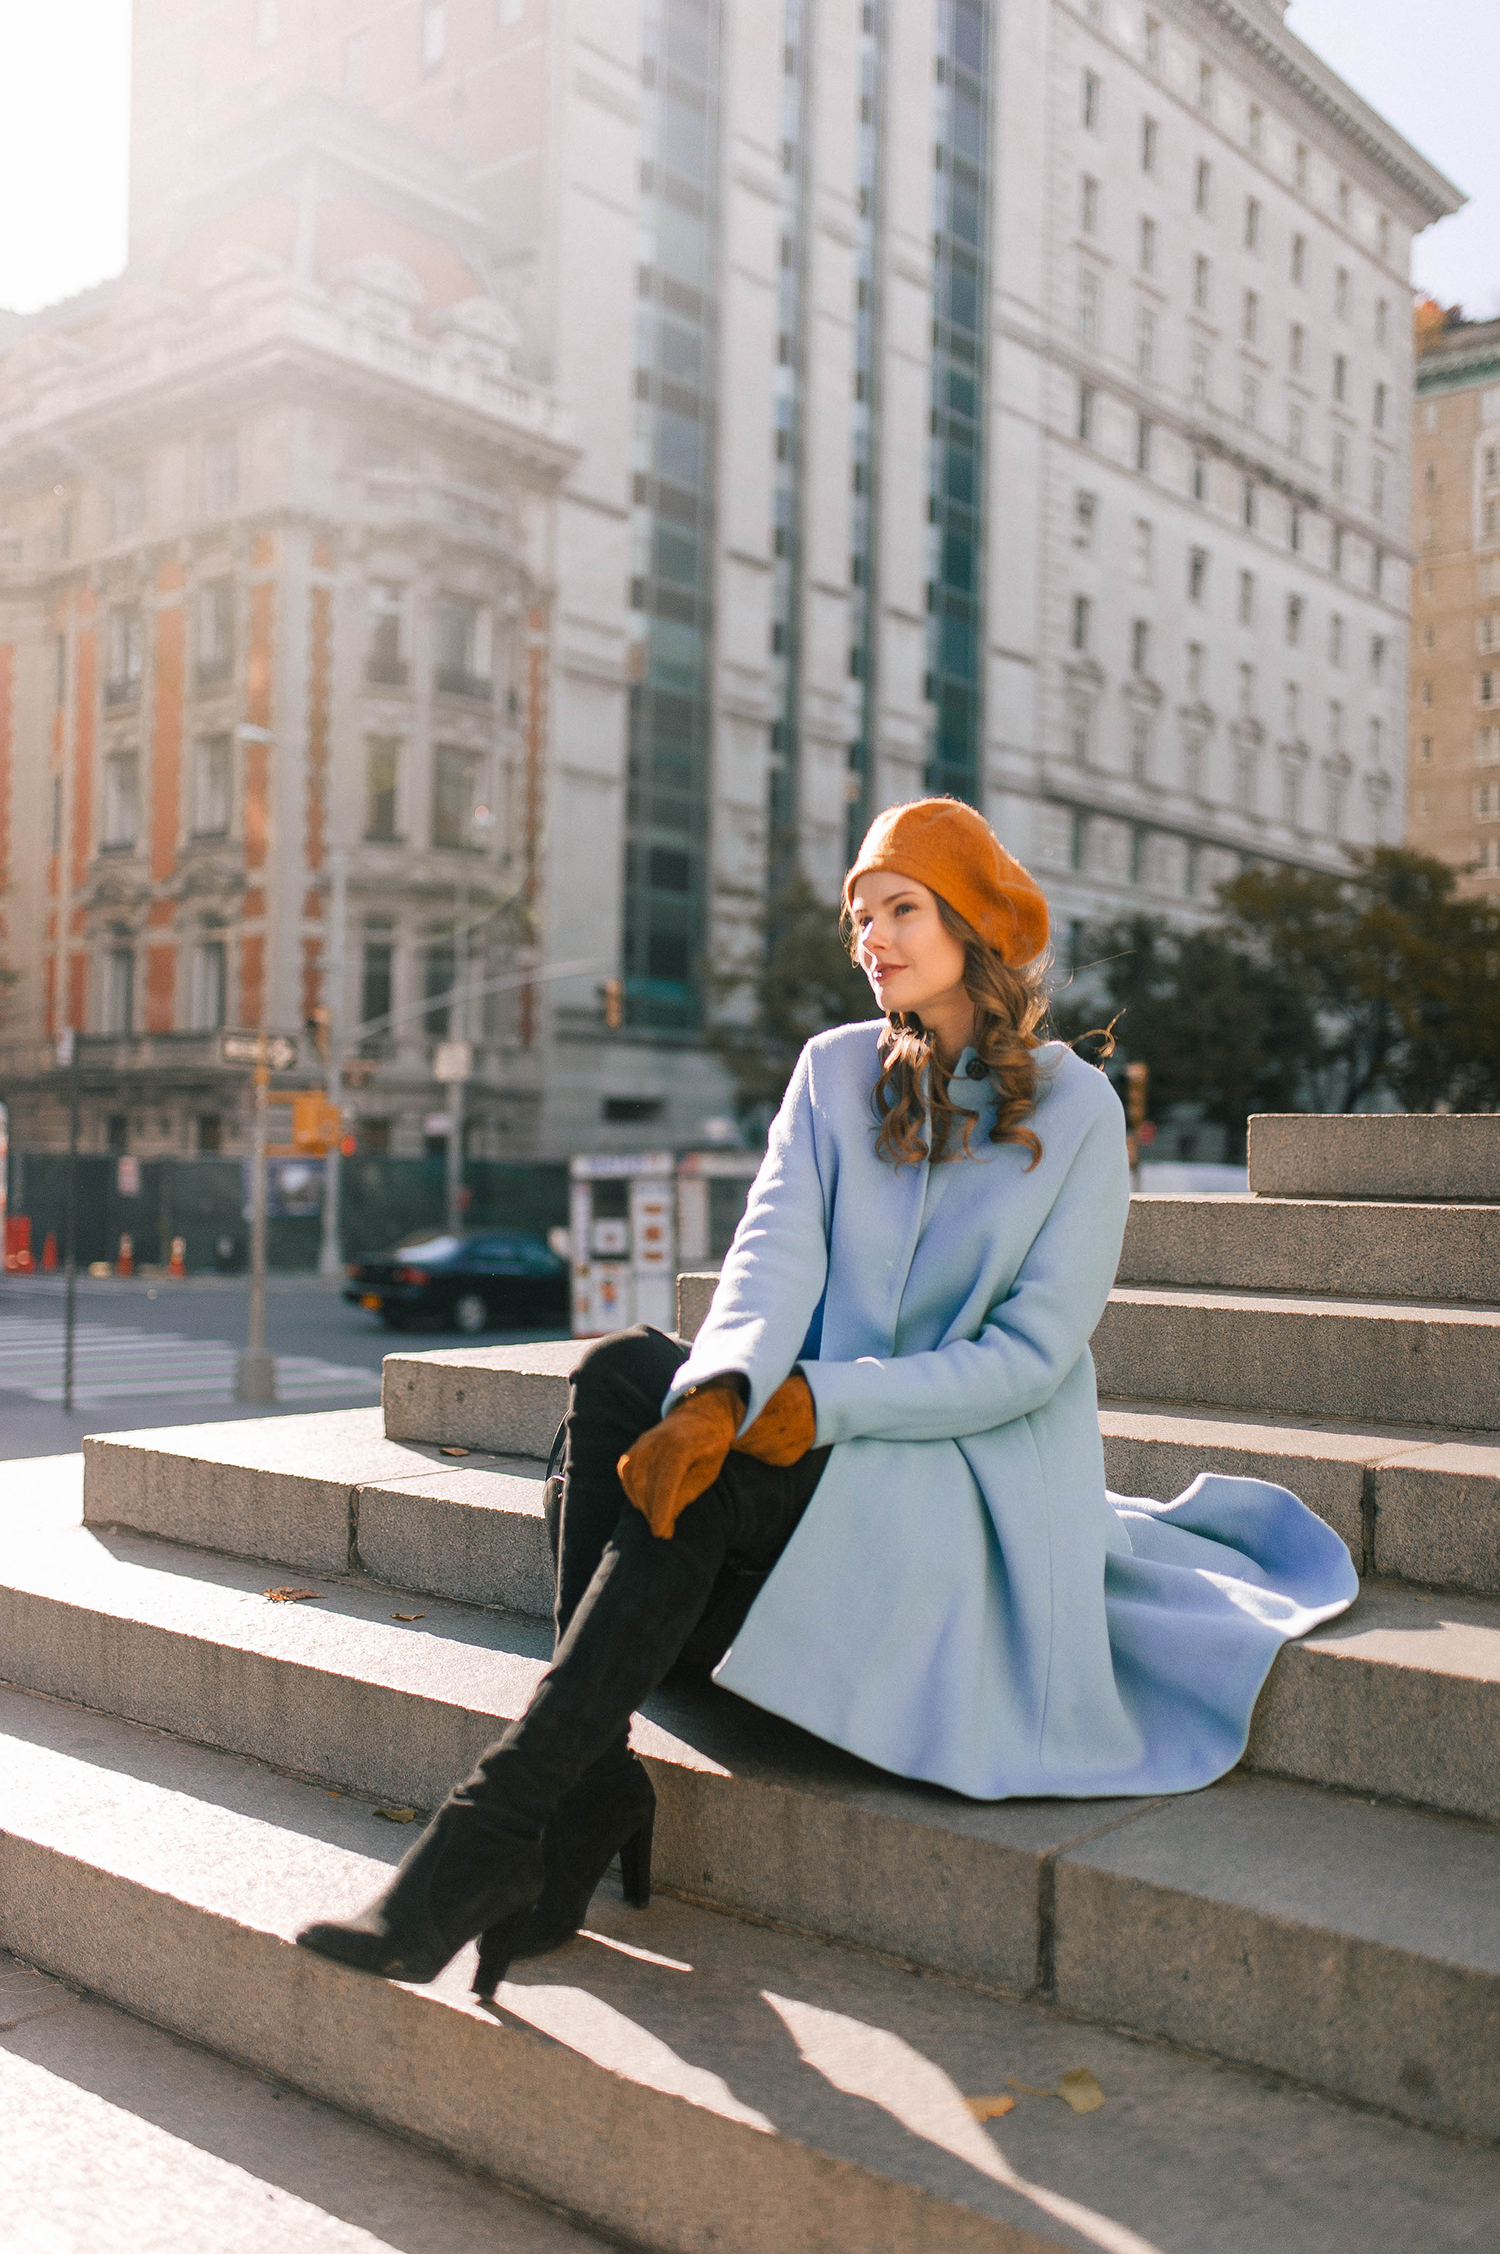 Alyssa Campanella of The A List blog in a Downton Abbey inspired look in New York